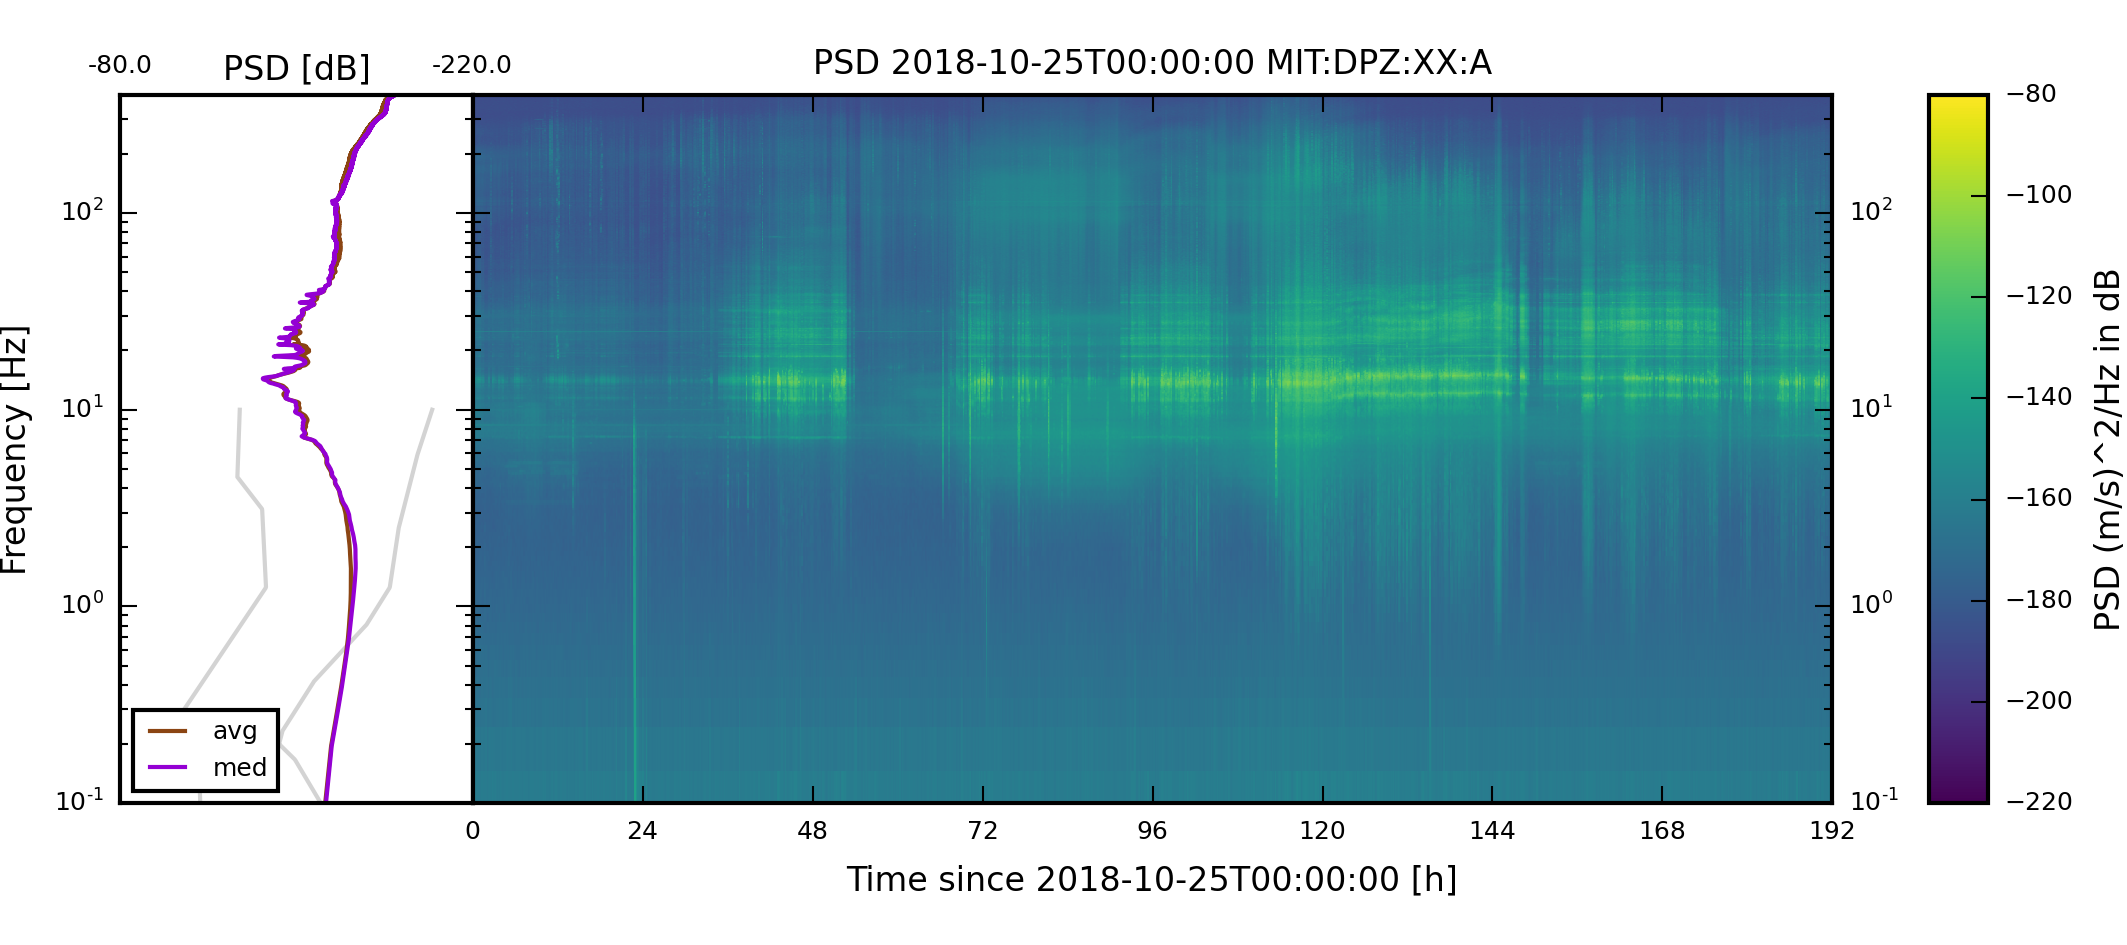 The spectrogram of the whole time span of component XX:MIT:A:DPZ.